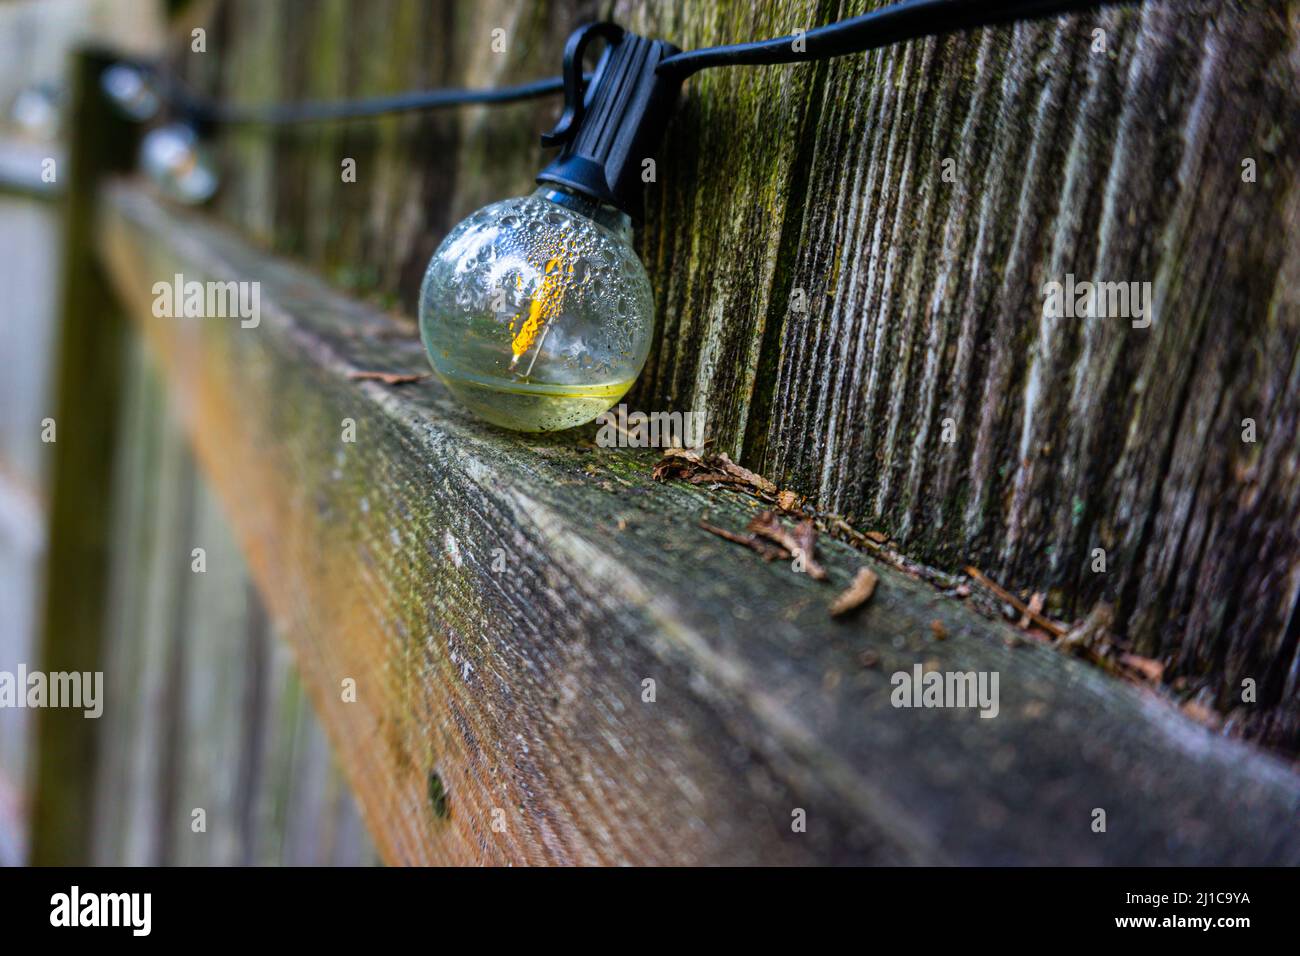 A lightbulb filling with water resting on a wood beam attached to a decaying fence. Stock Photo